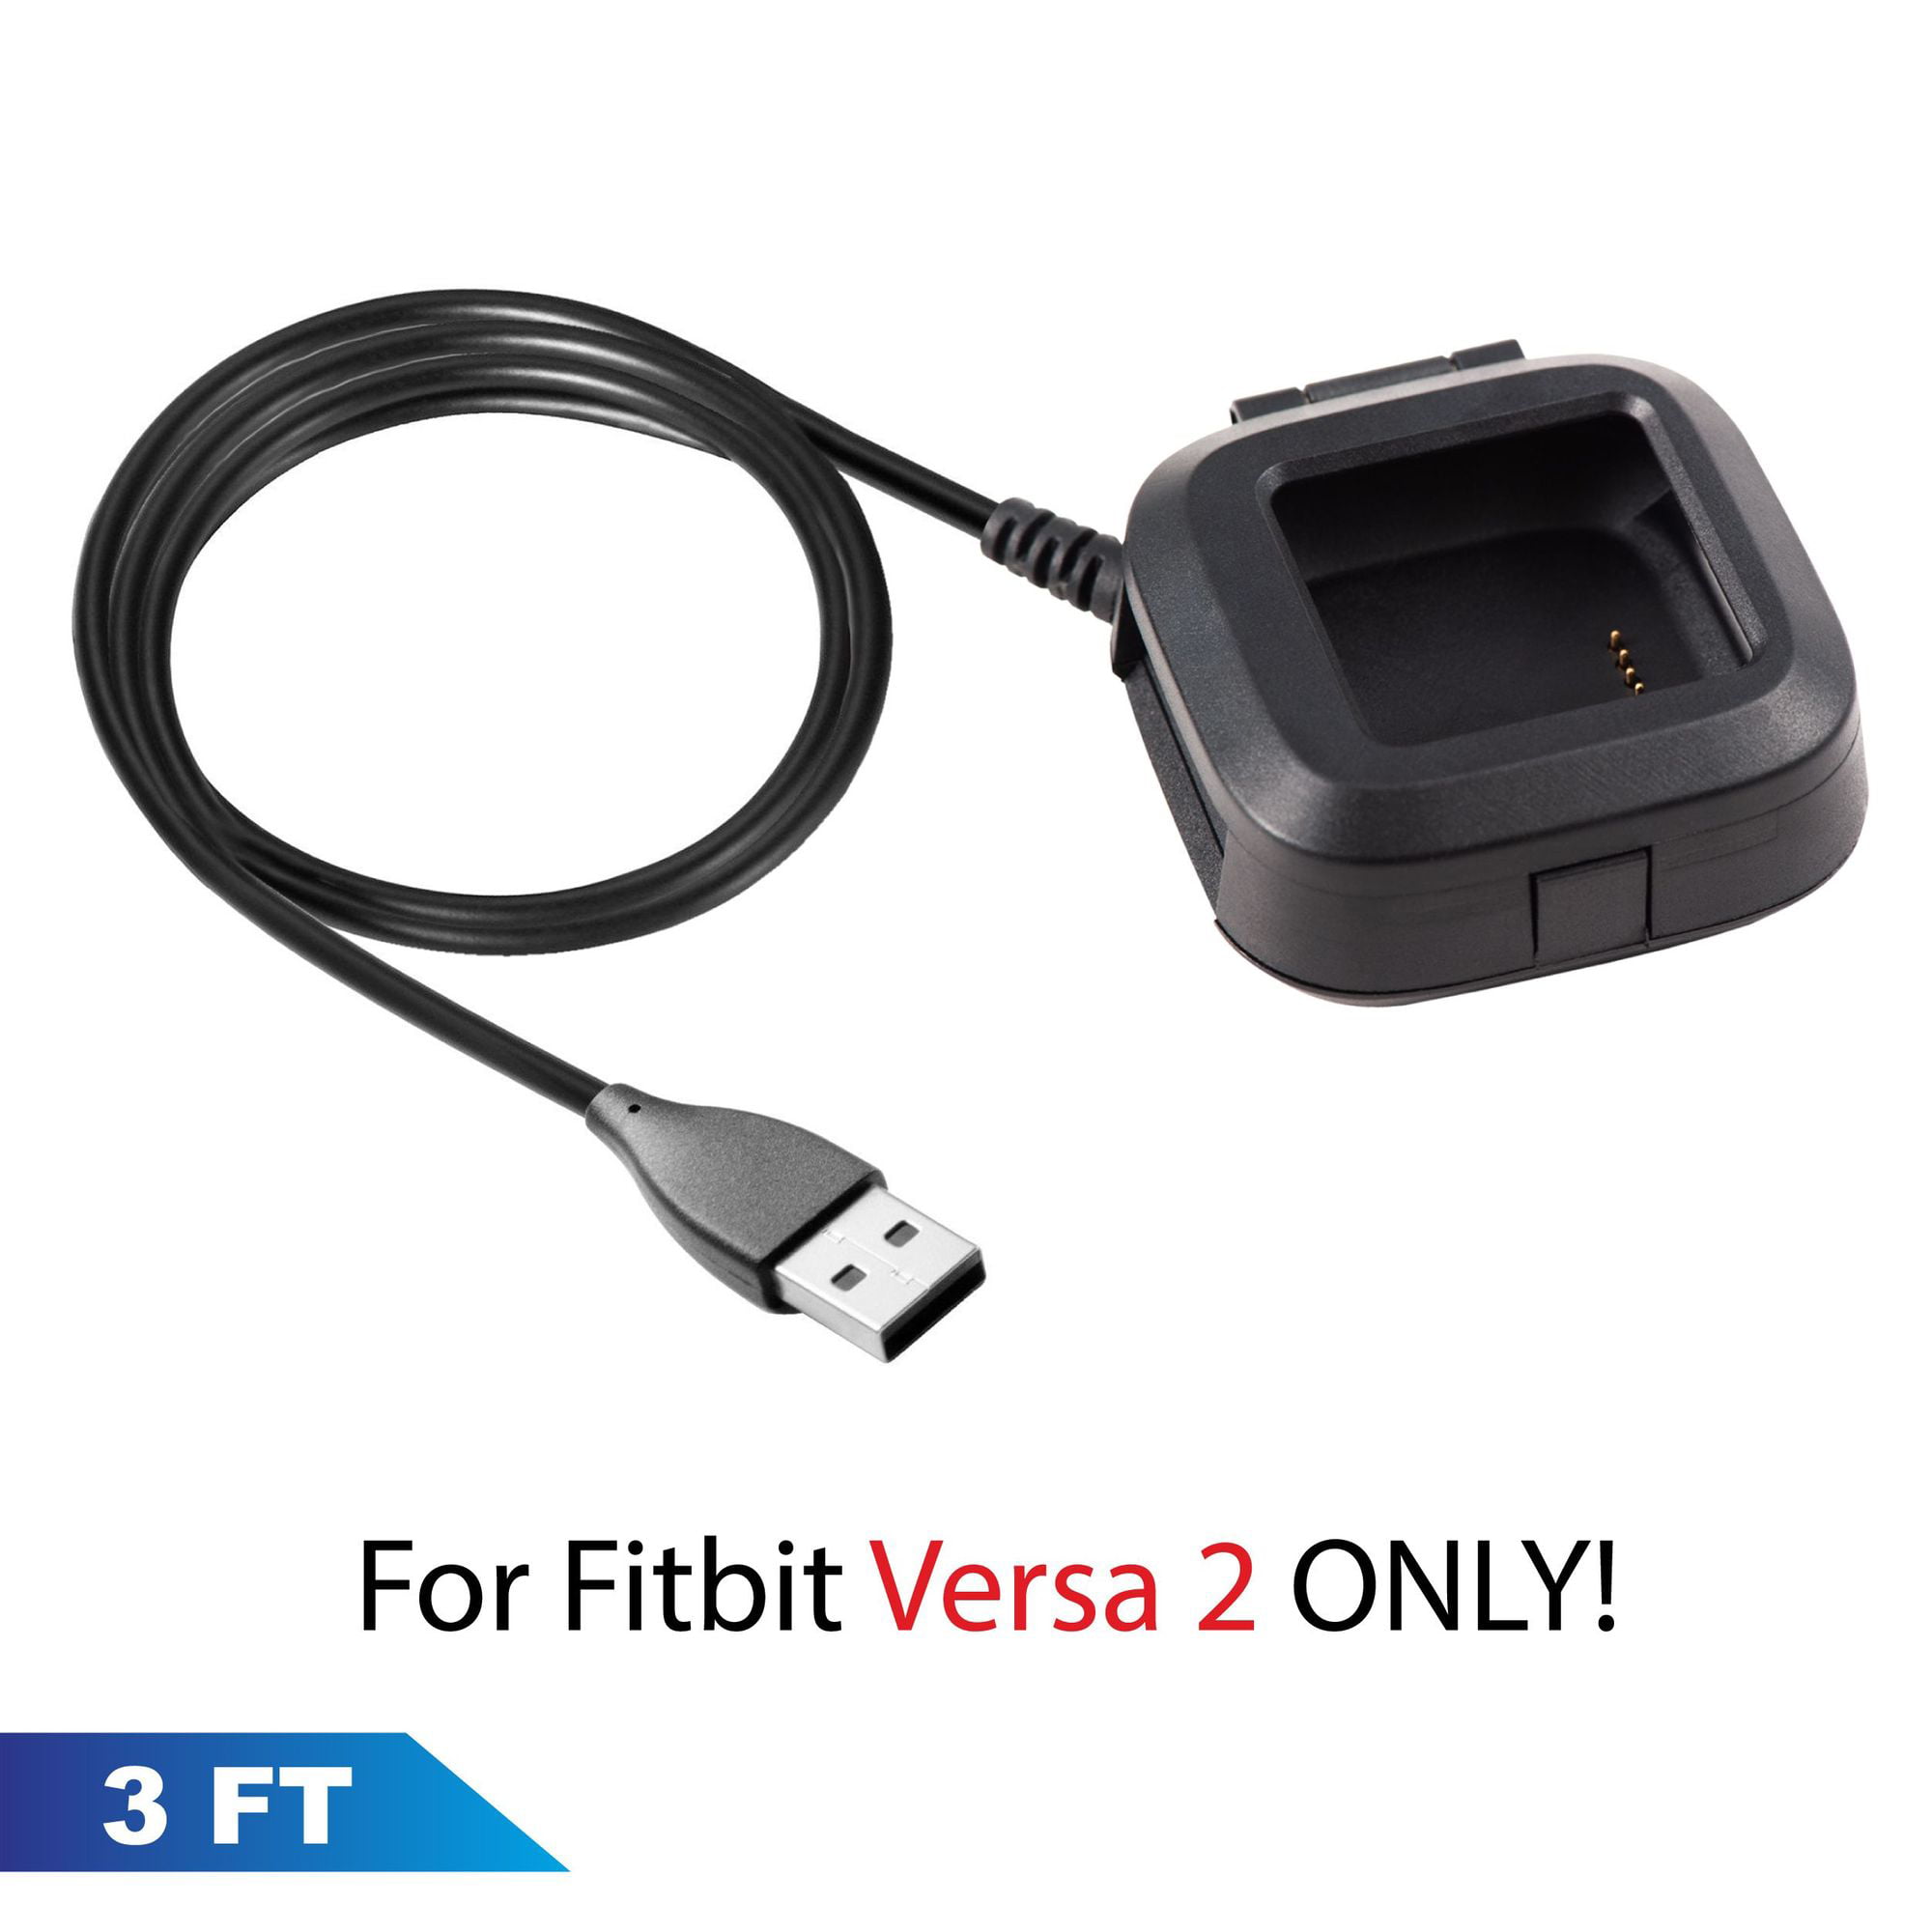 For Fitbit Versa 2 Charger Cable, USB 